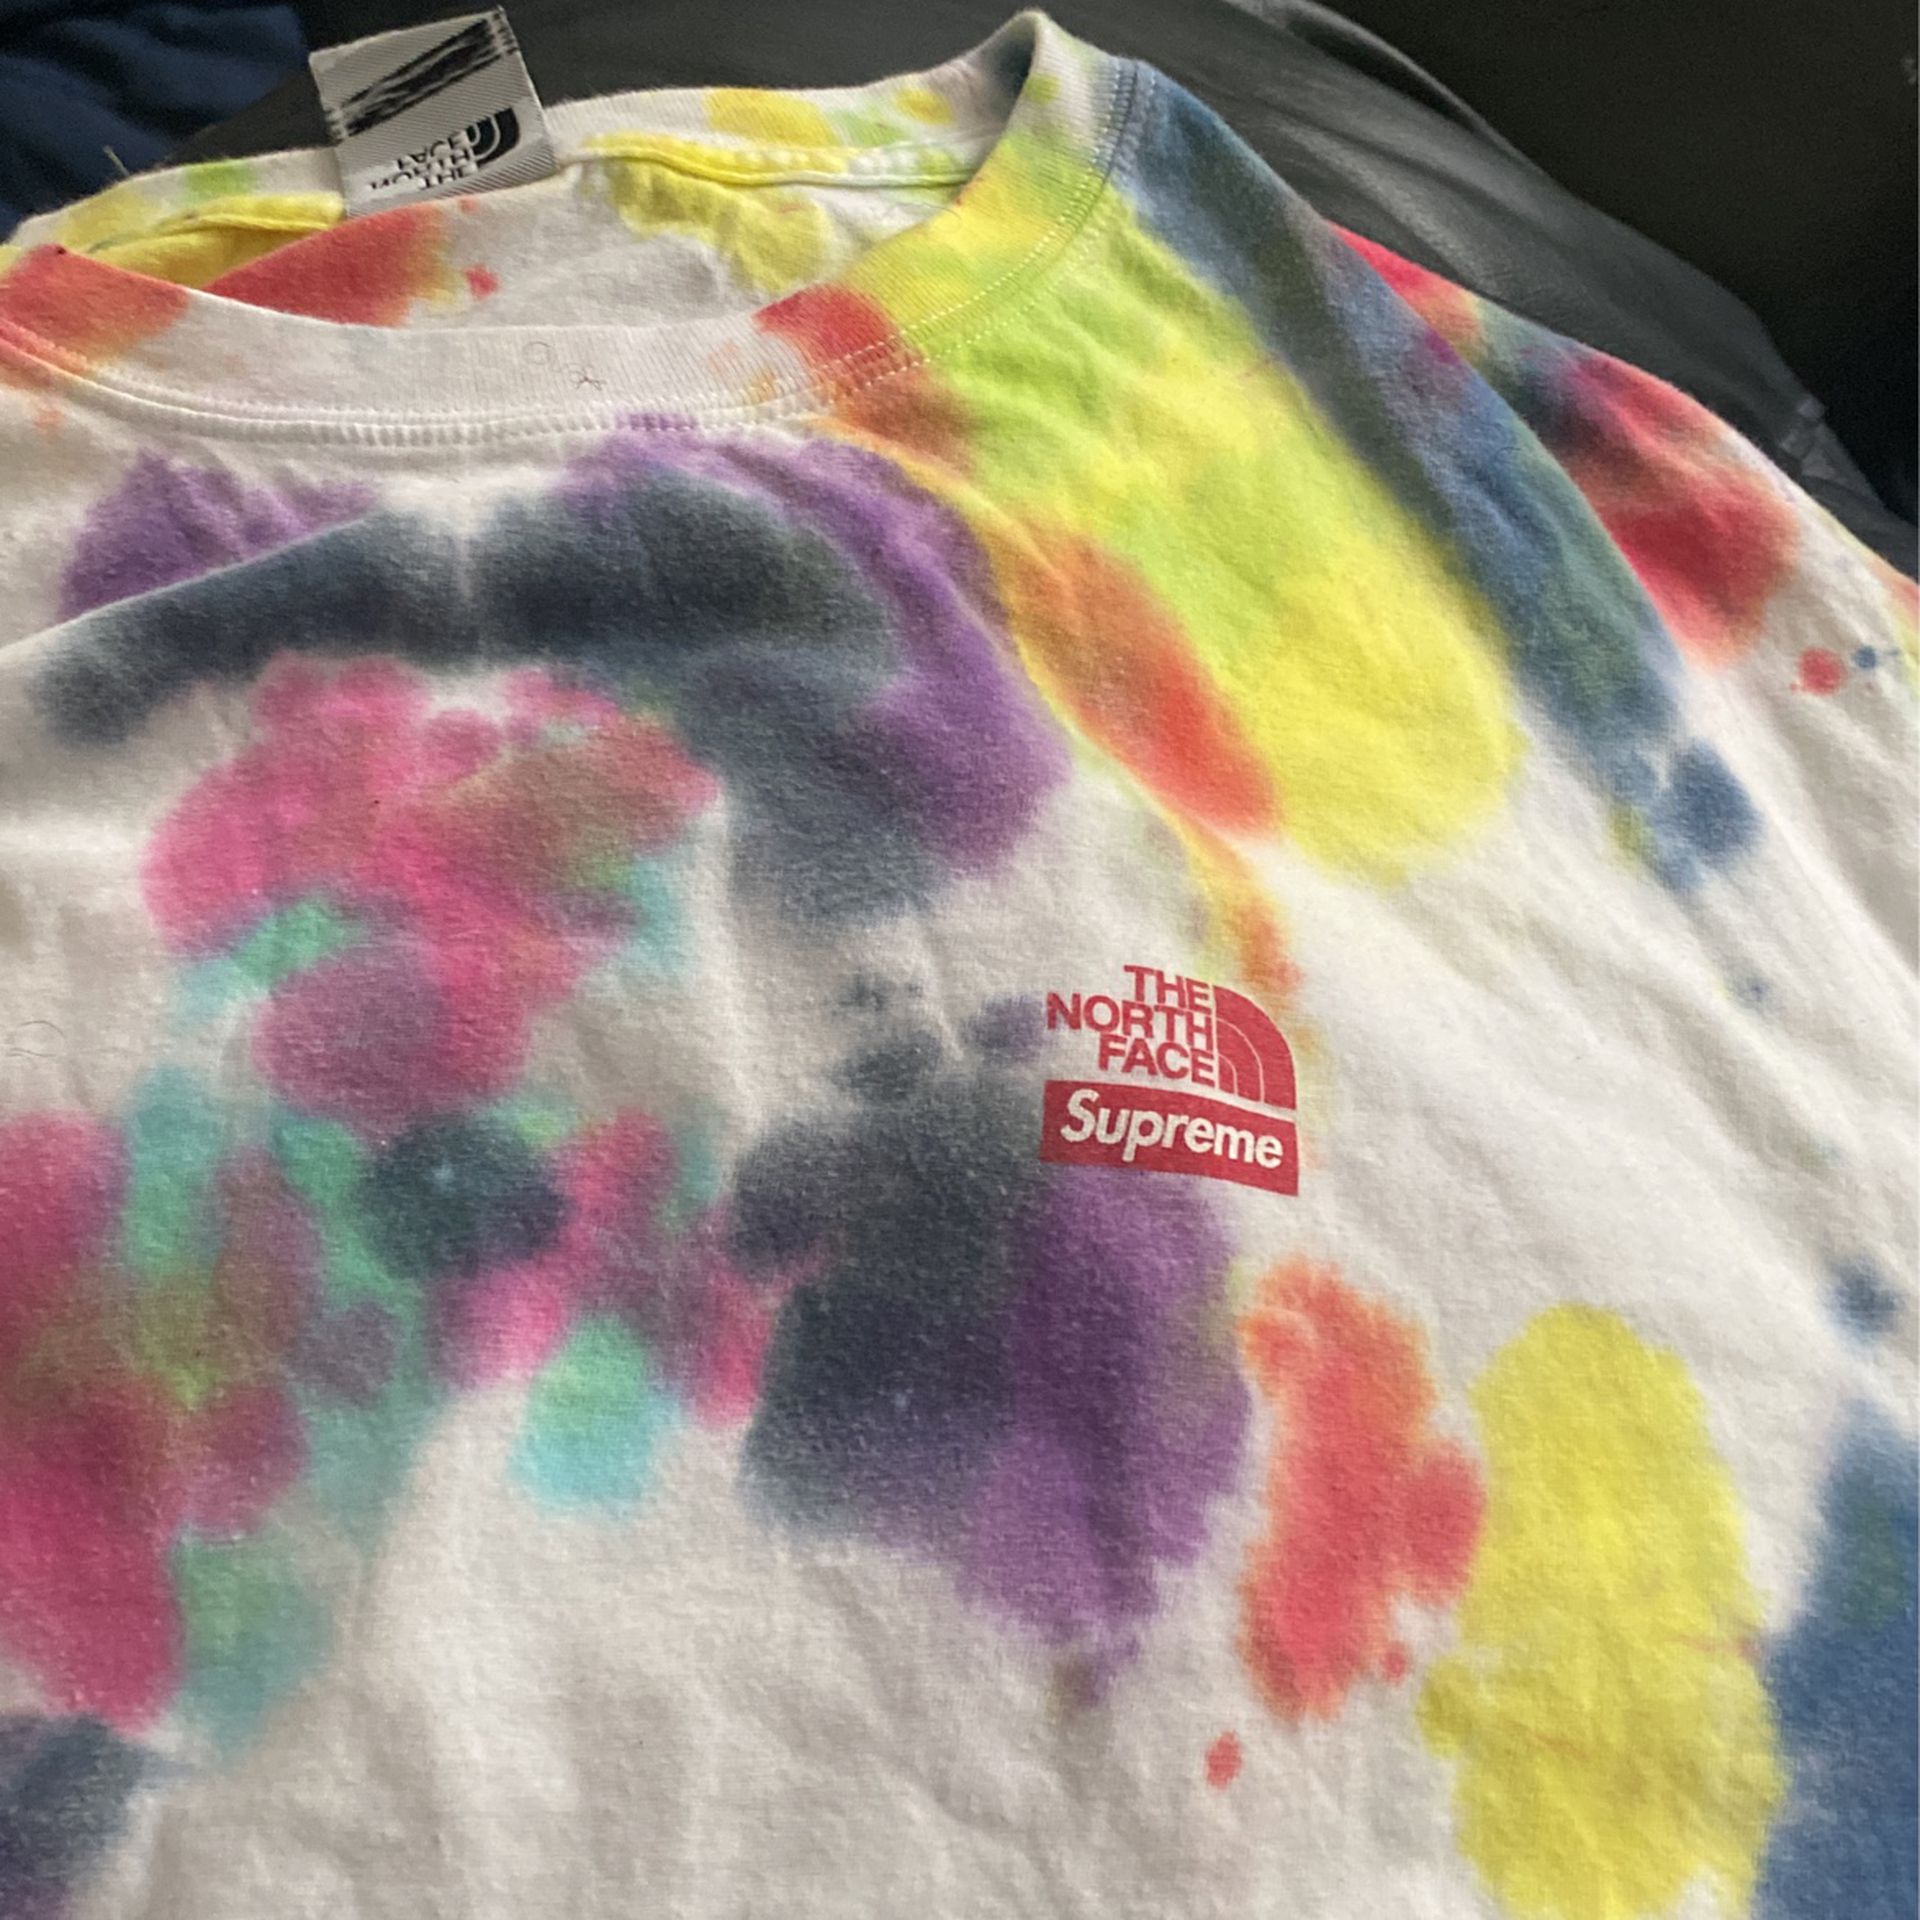 Supreme x North-face tee 